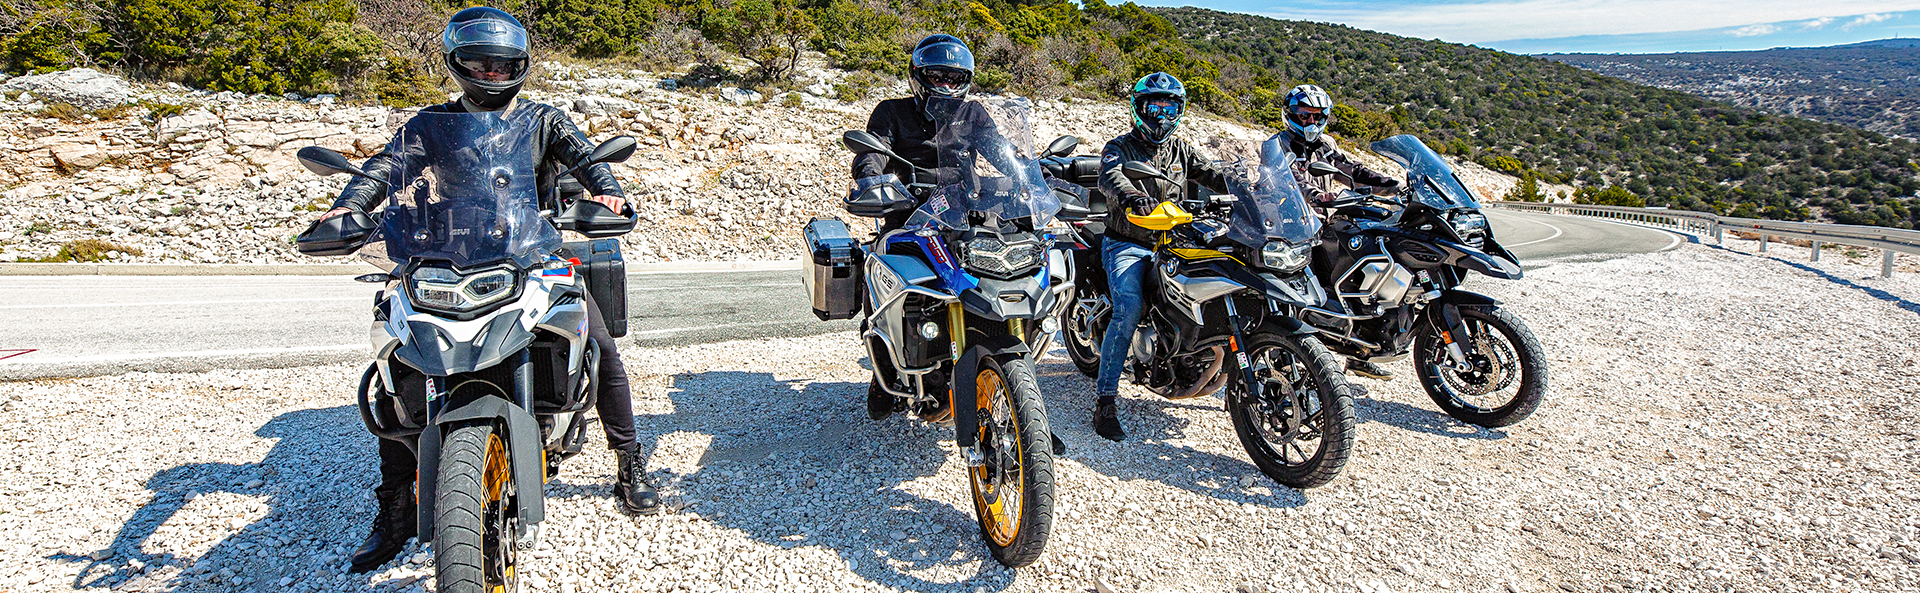 Rent a motorcycle Croatia guide